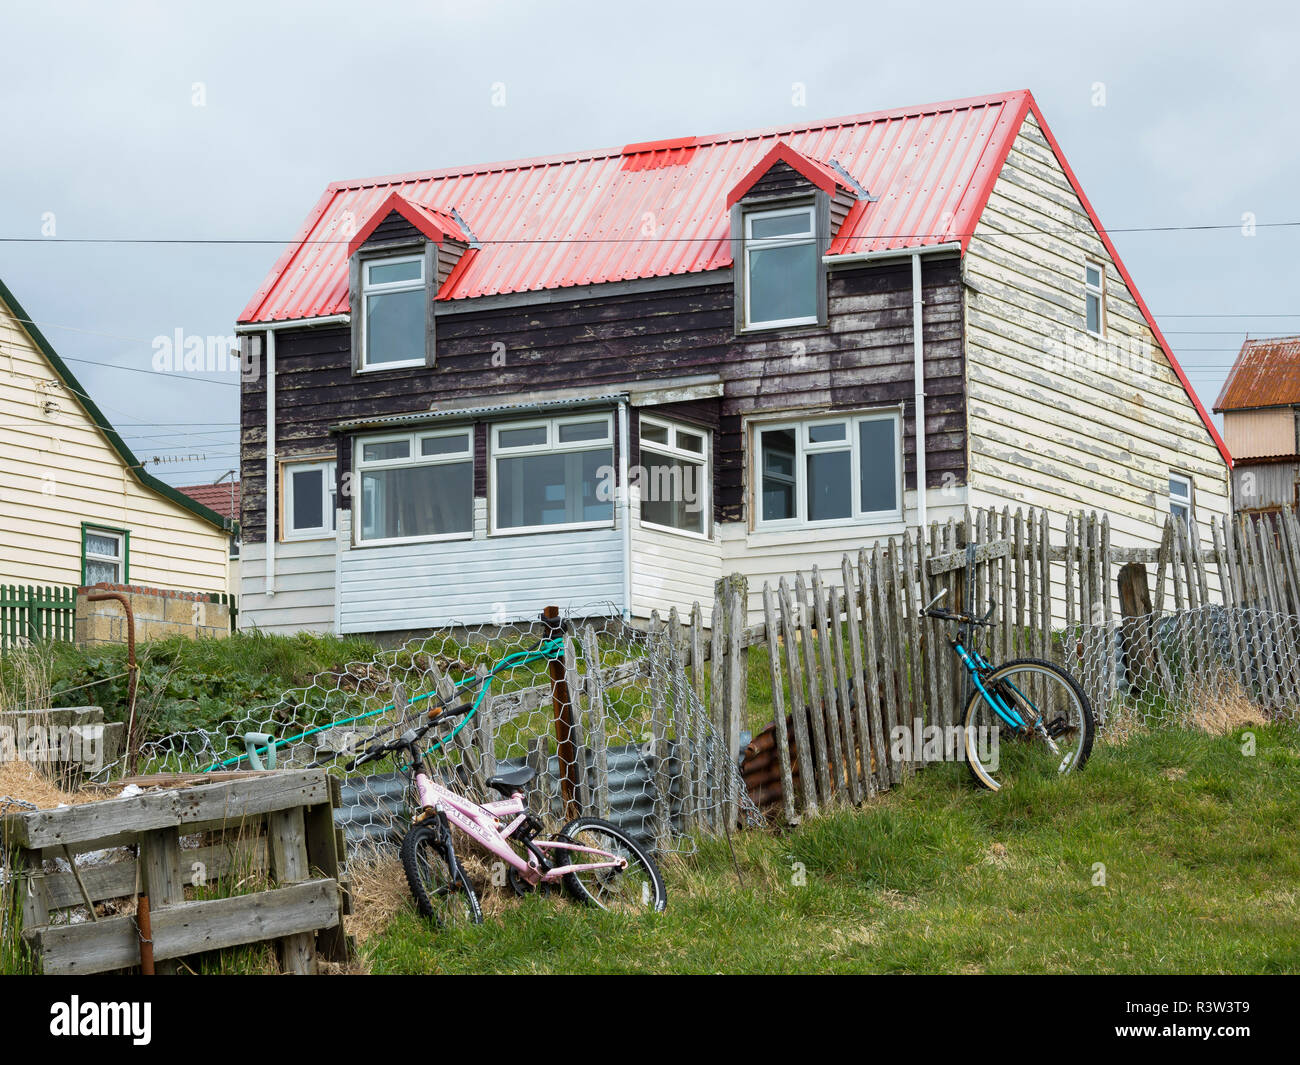 Colonists cottages, the old town of Stanley, capital of the Falkland Islands. (Editorial Use Only) Stock Photo